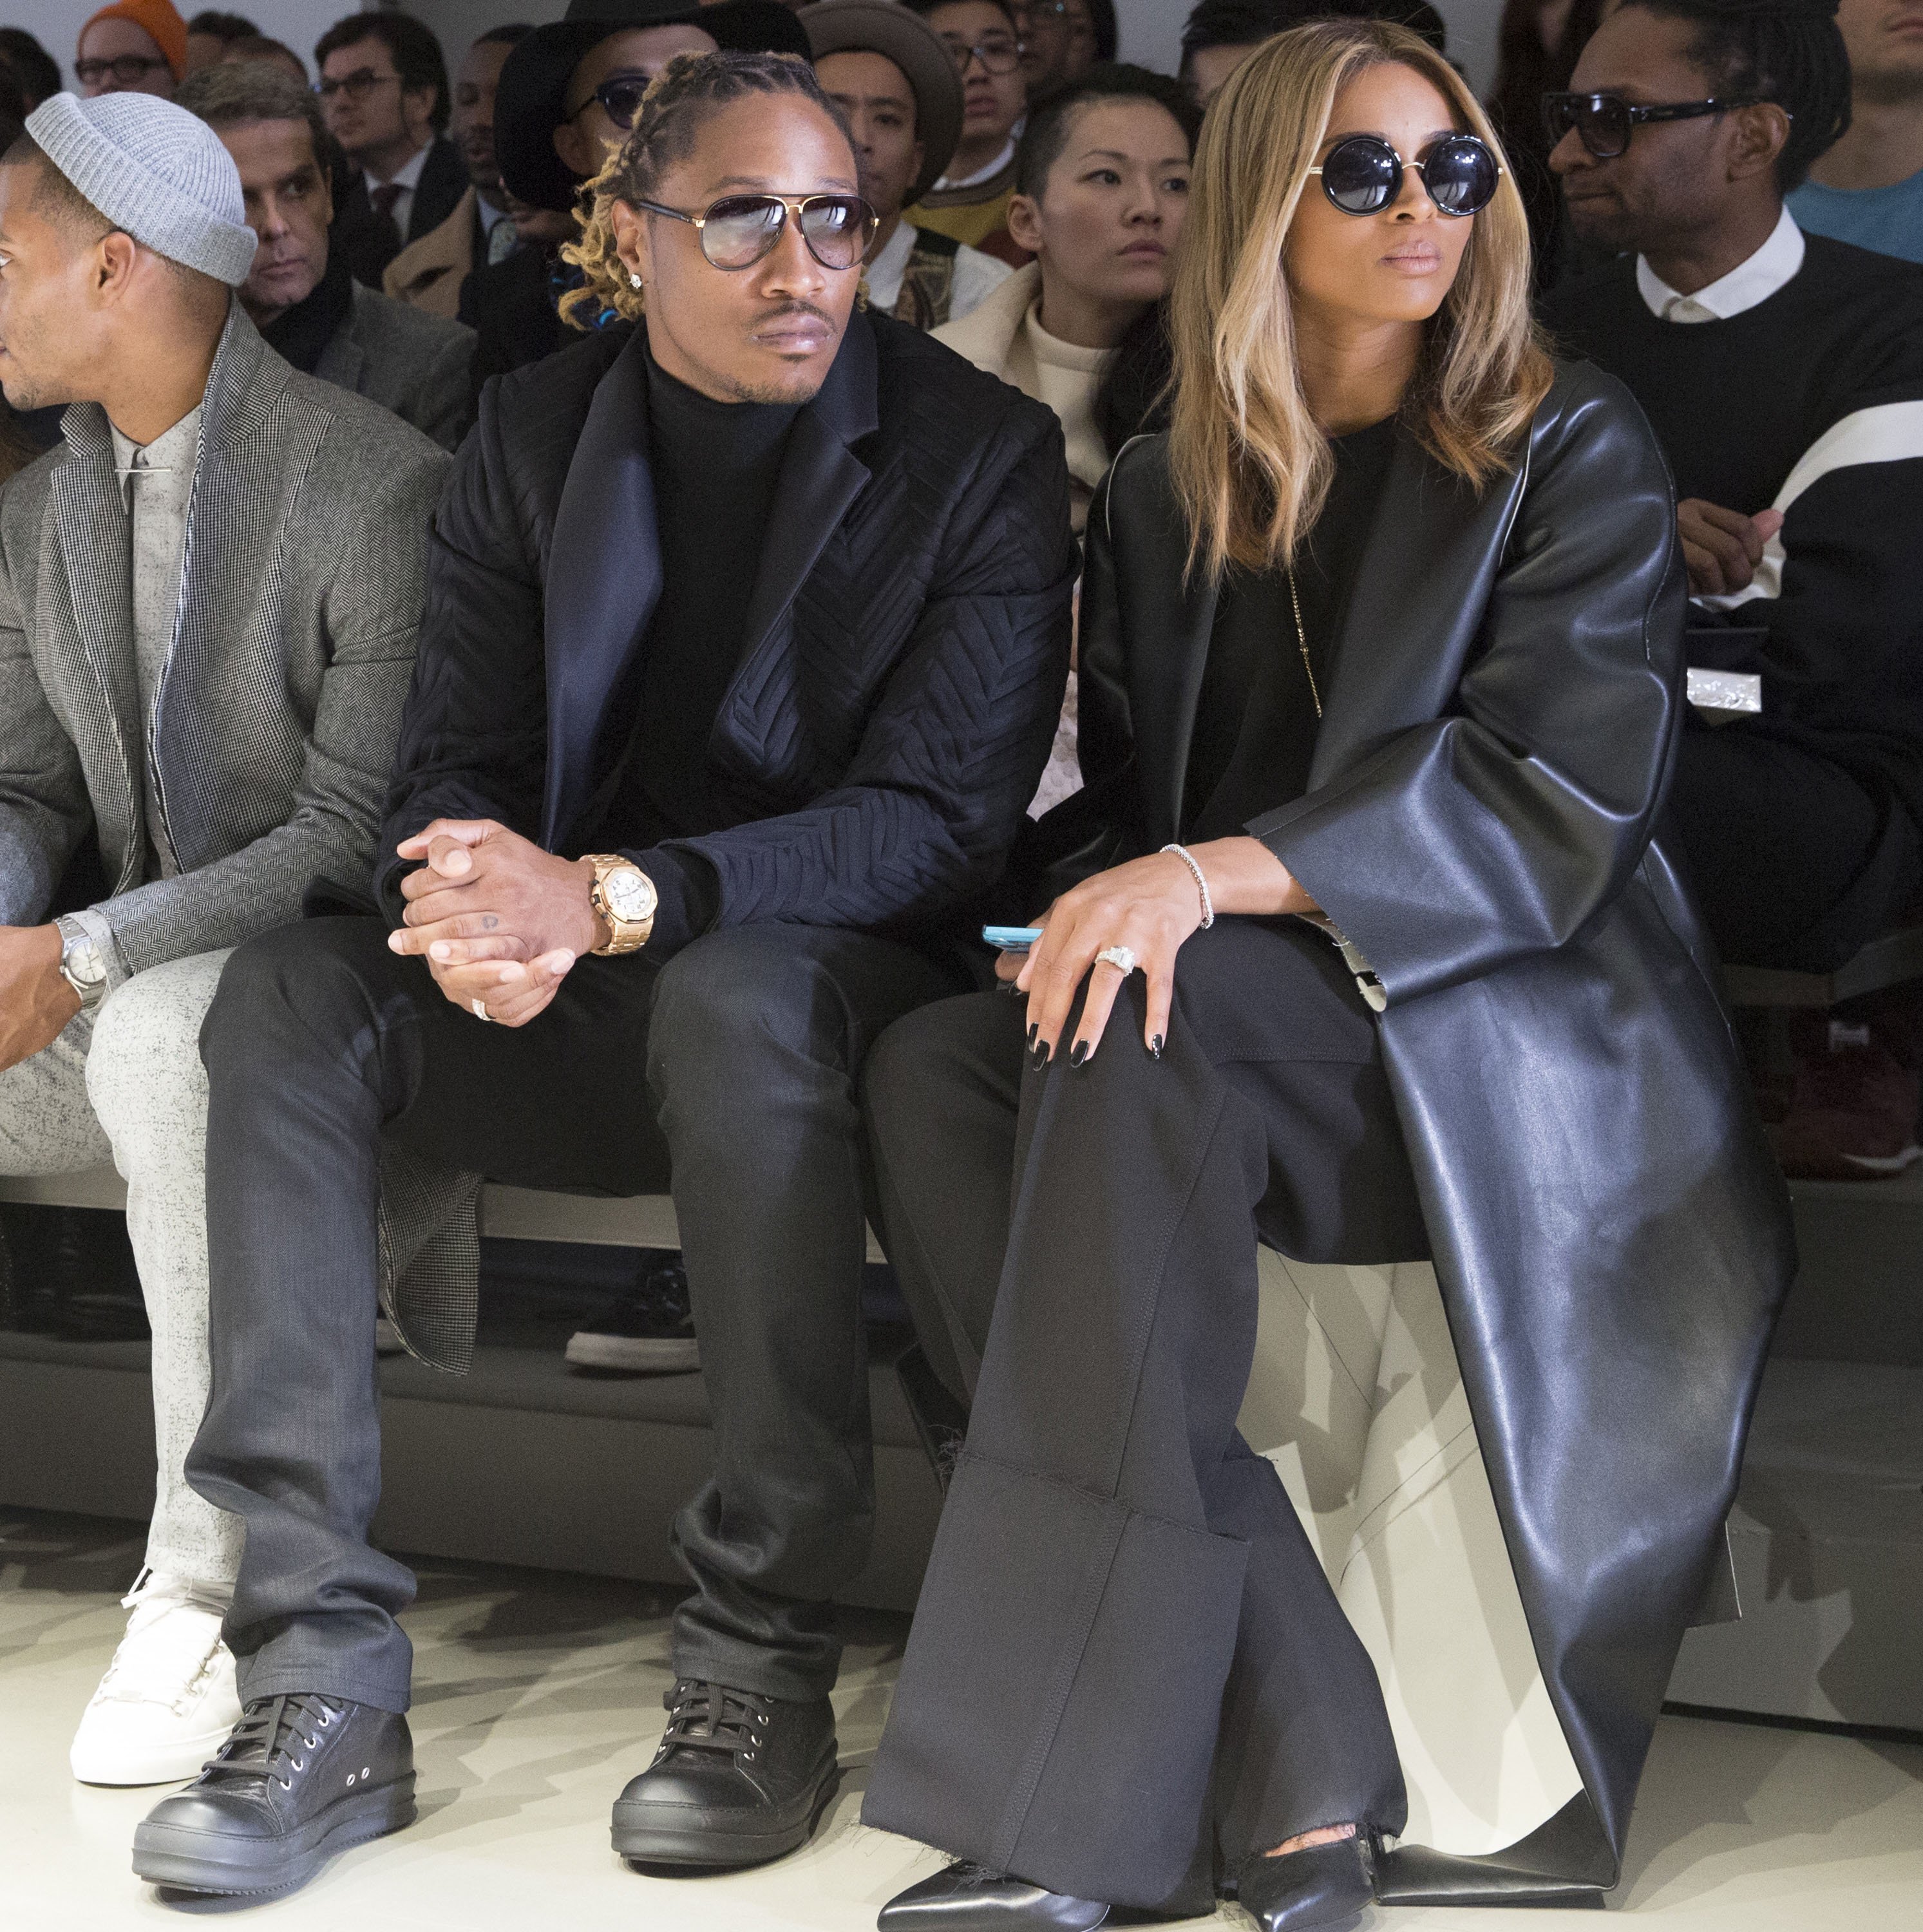 (Before the split) Future & Ciara at the Milan Fashion Week in Milan, Italy on Jan. 12, 2014. | Photo: Getty Images